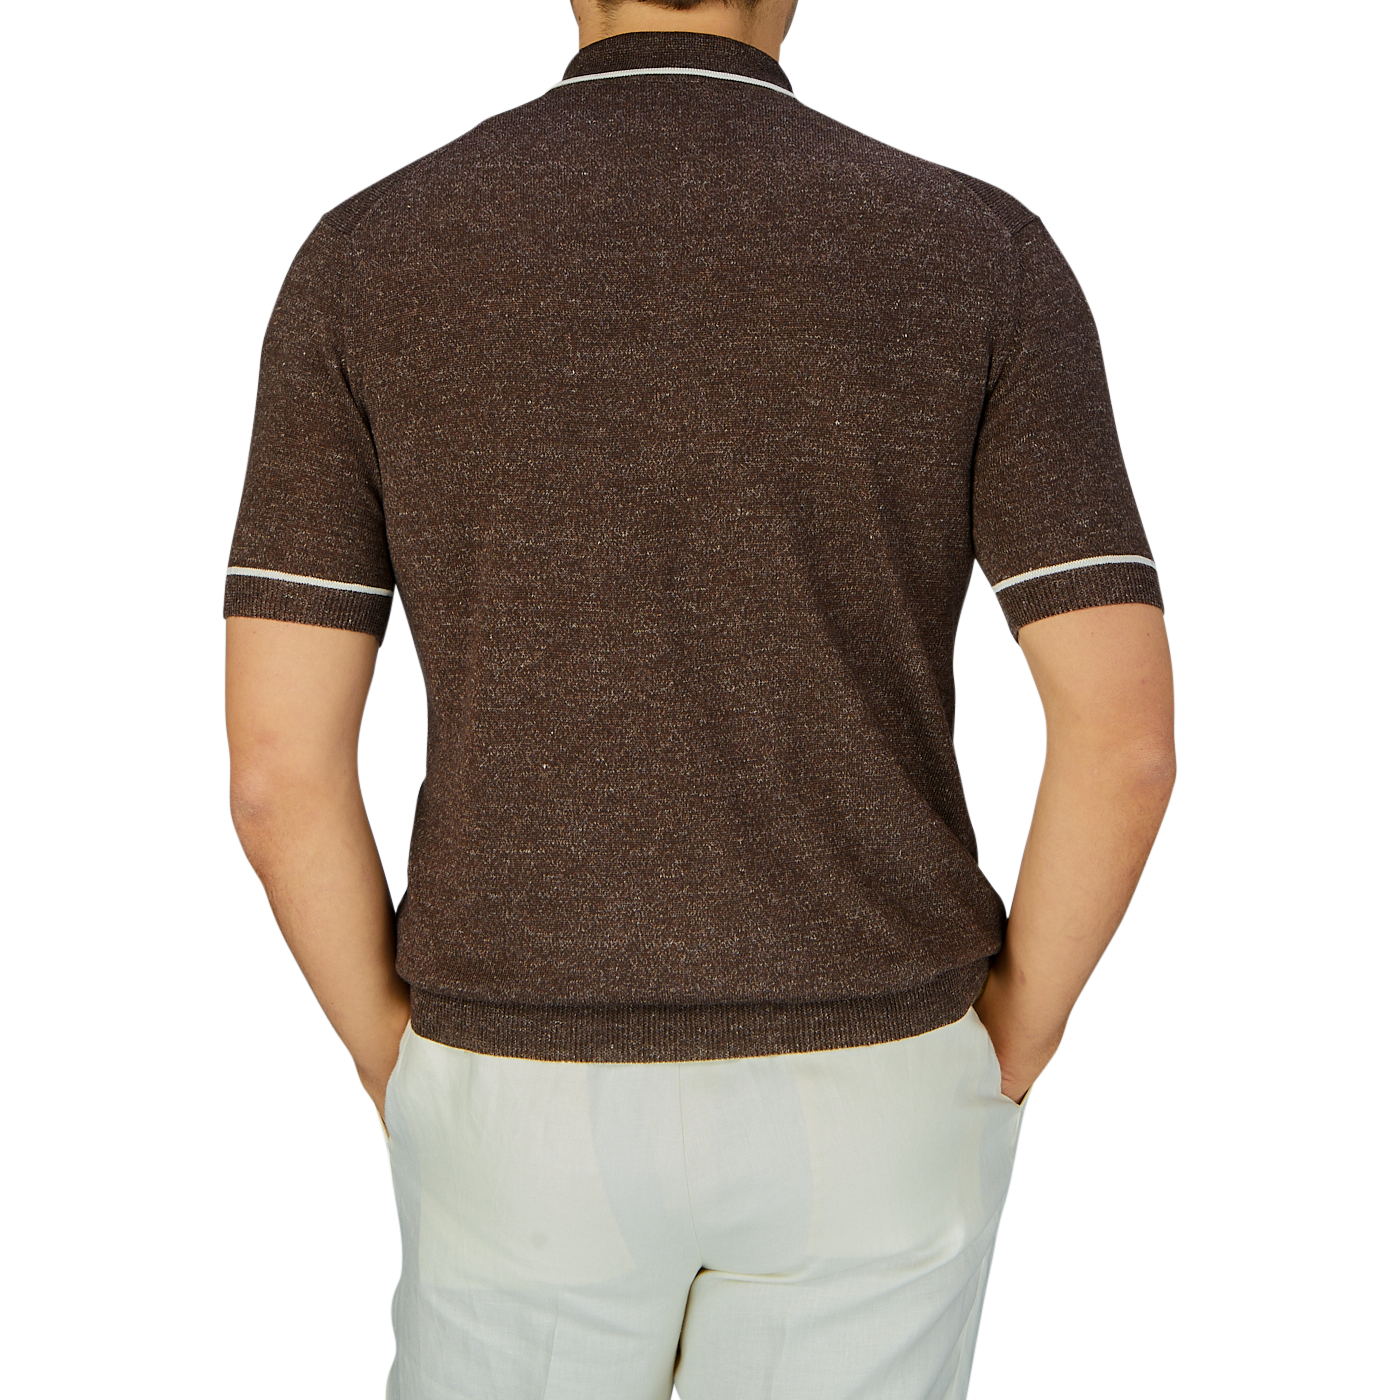 Man standing with his back to the camera wearing an Altea Brown Melange Linen Cashmere Blend Polo Shirt made in Italy and white pants.